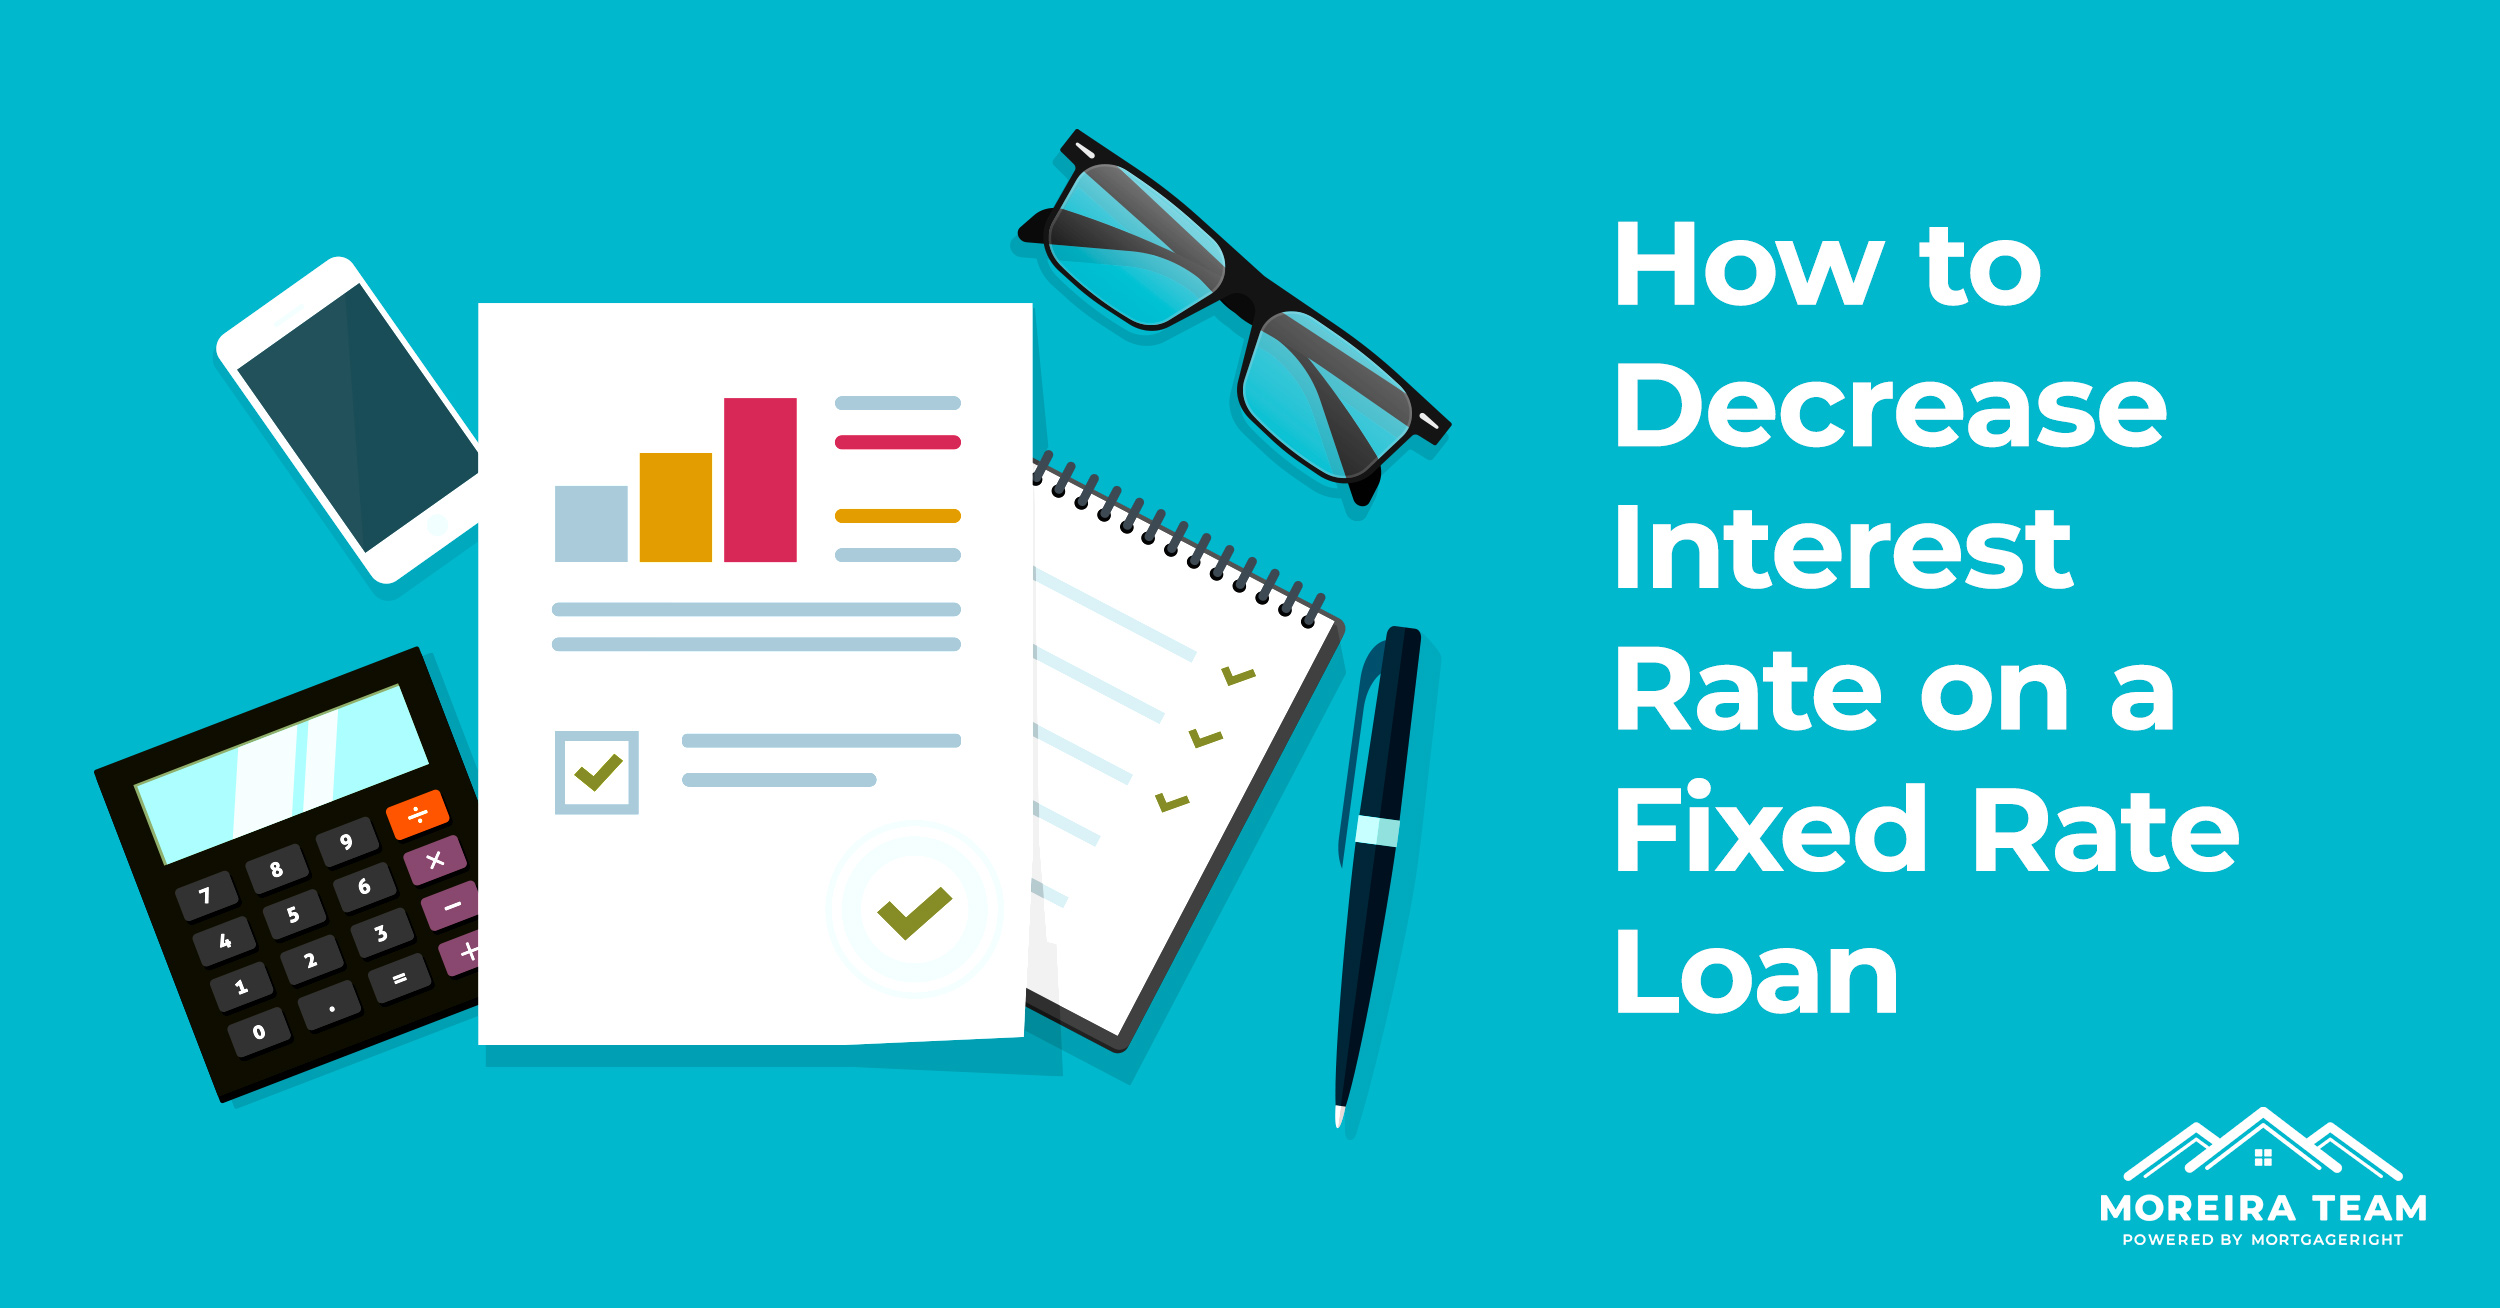 Decrease interest rate on your current loan